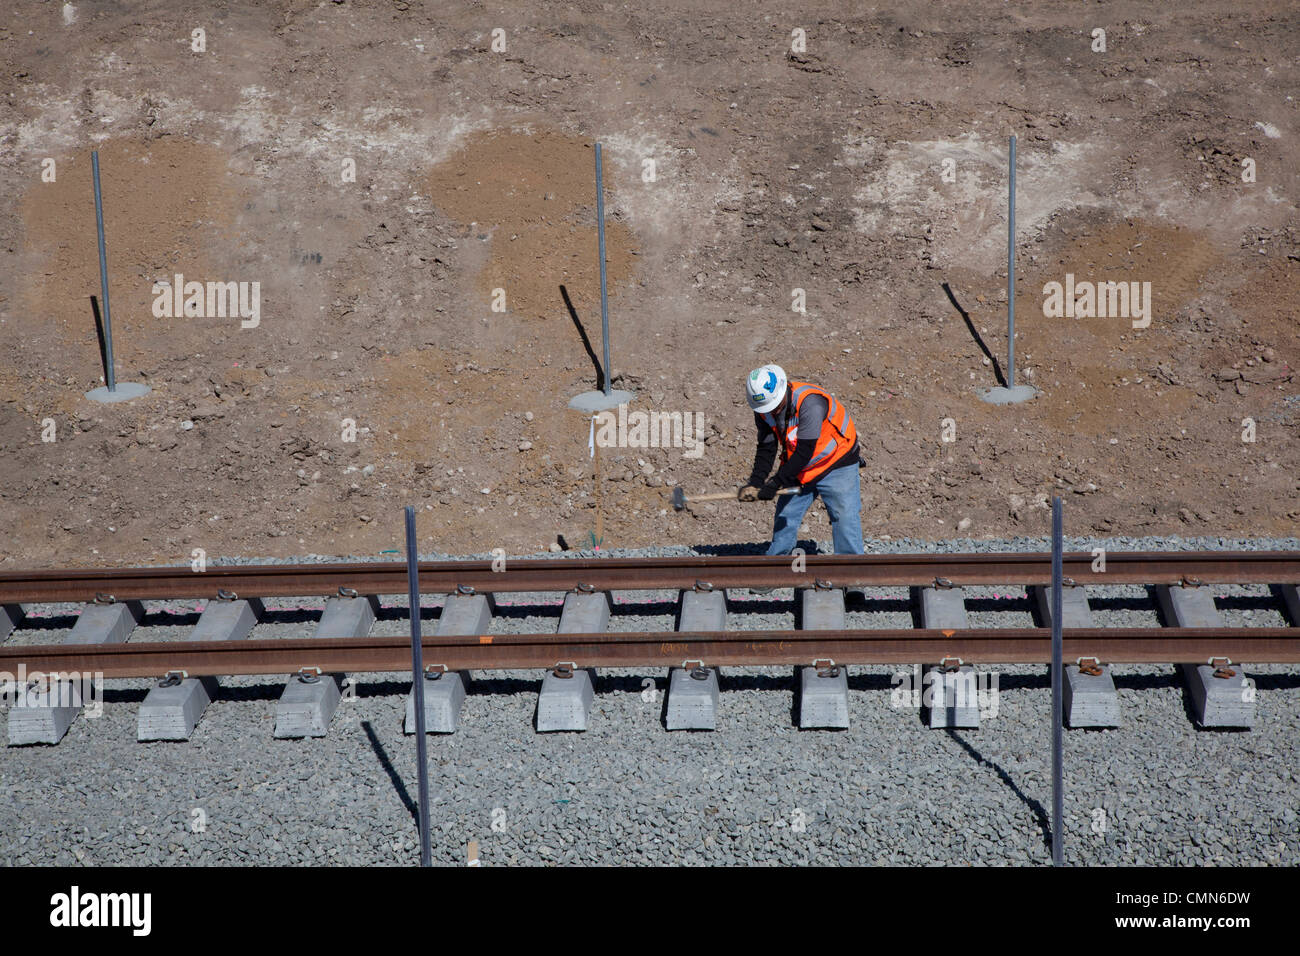 Lakewood, Colorado - Workers build a light rail urban transit system linking Denver with its western suburbs. Stock Photo